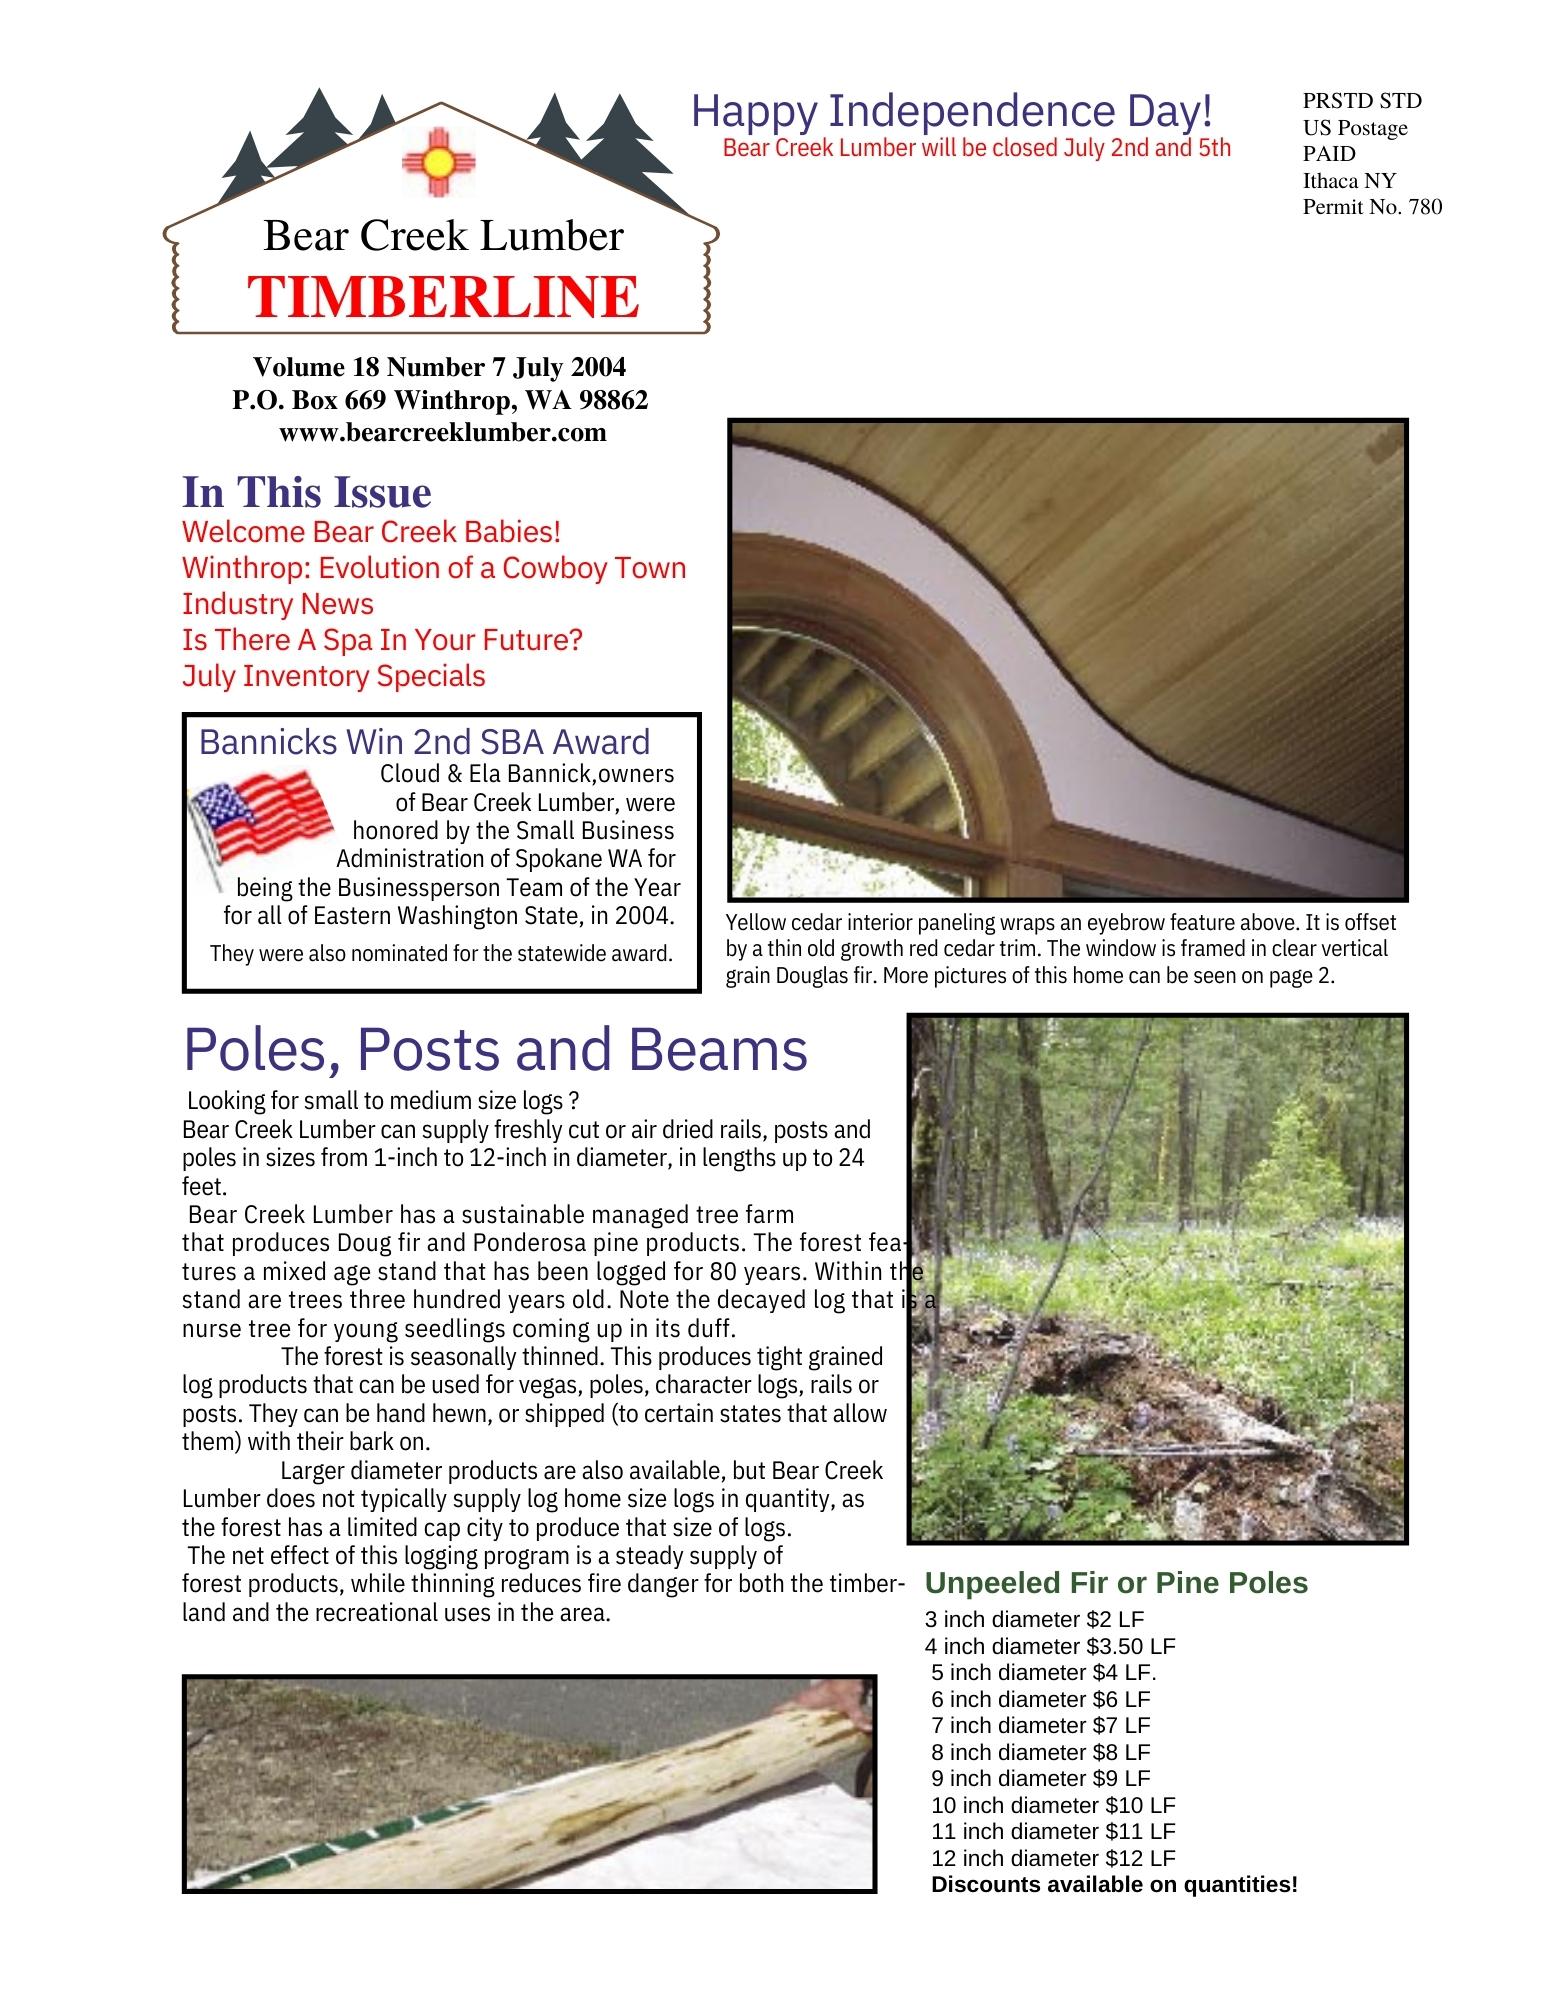 Benefits of Using Natural Wood For Interior And Exterior Trim